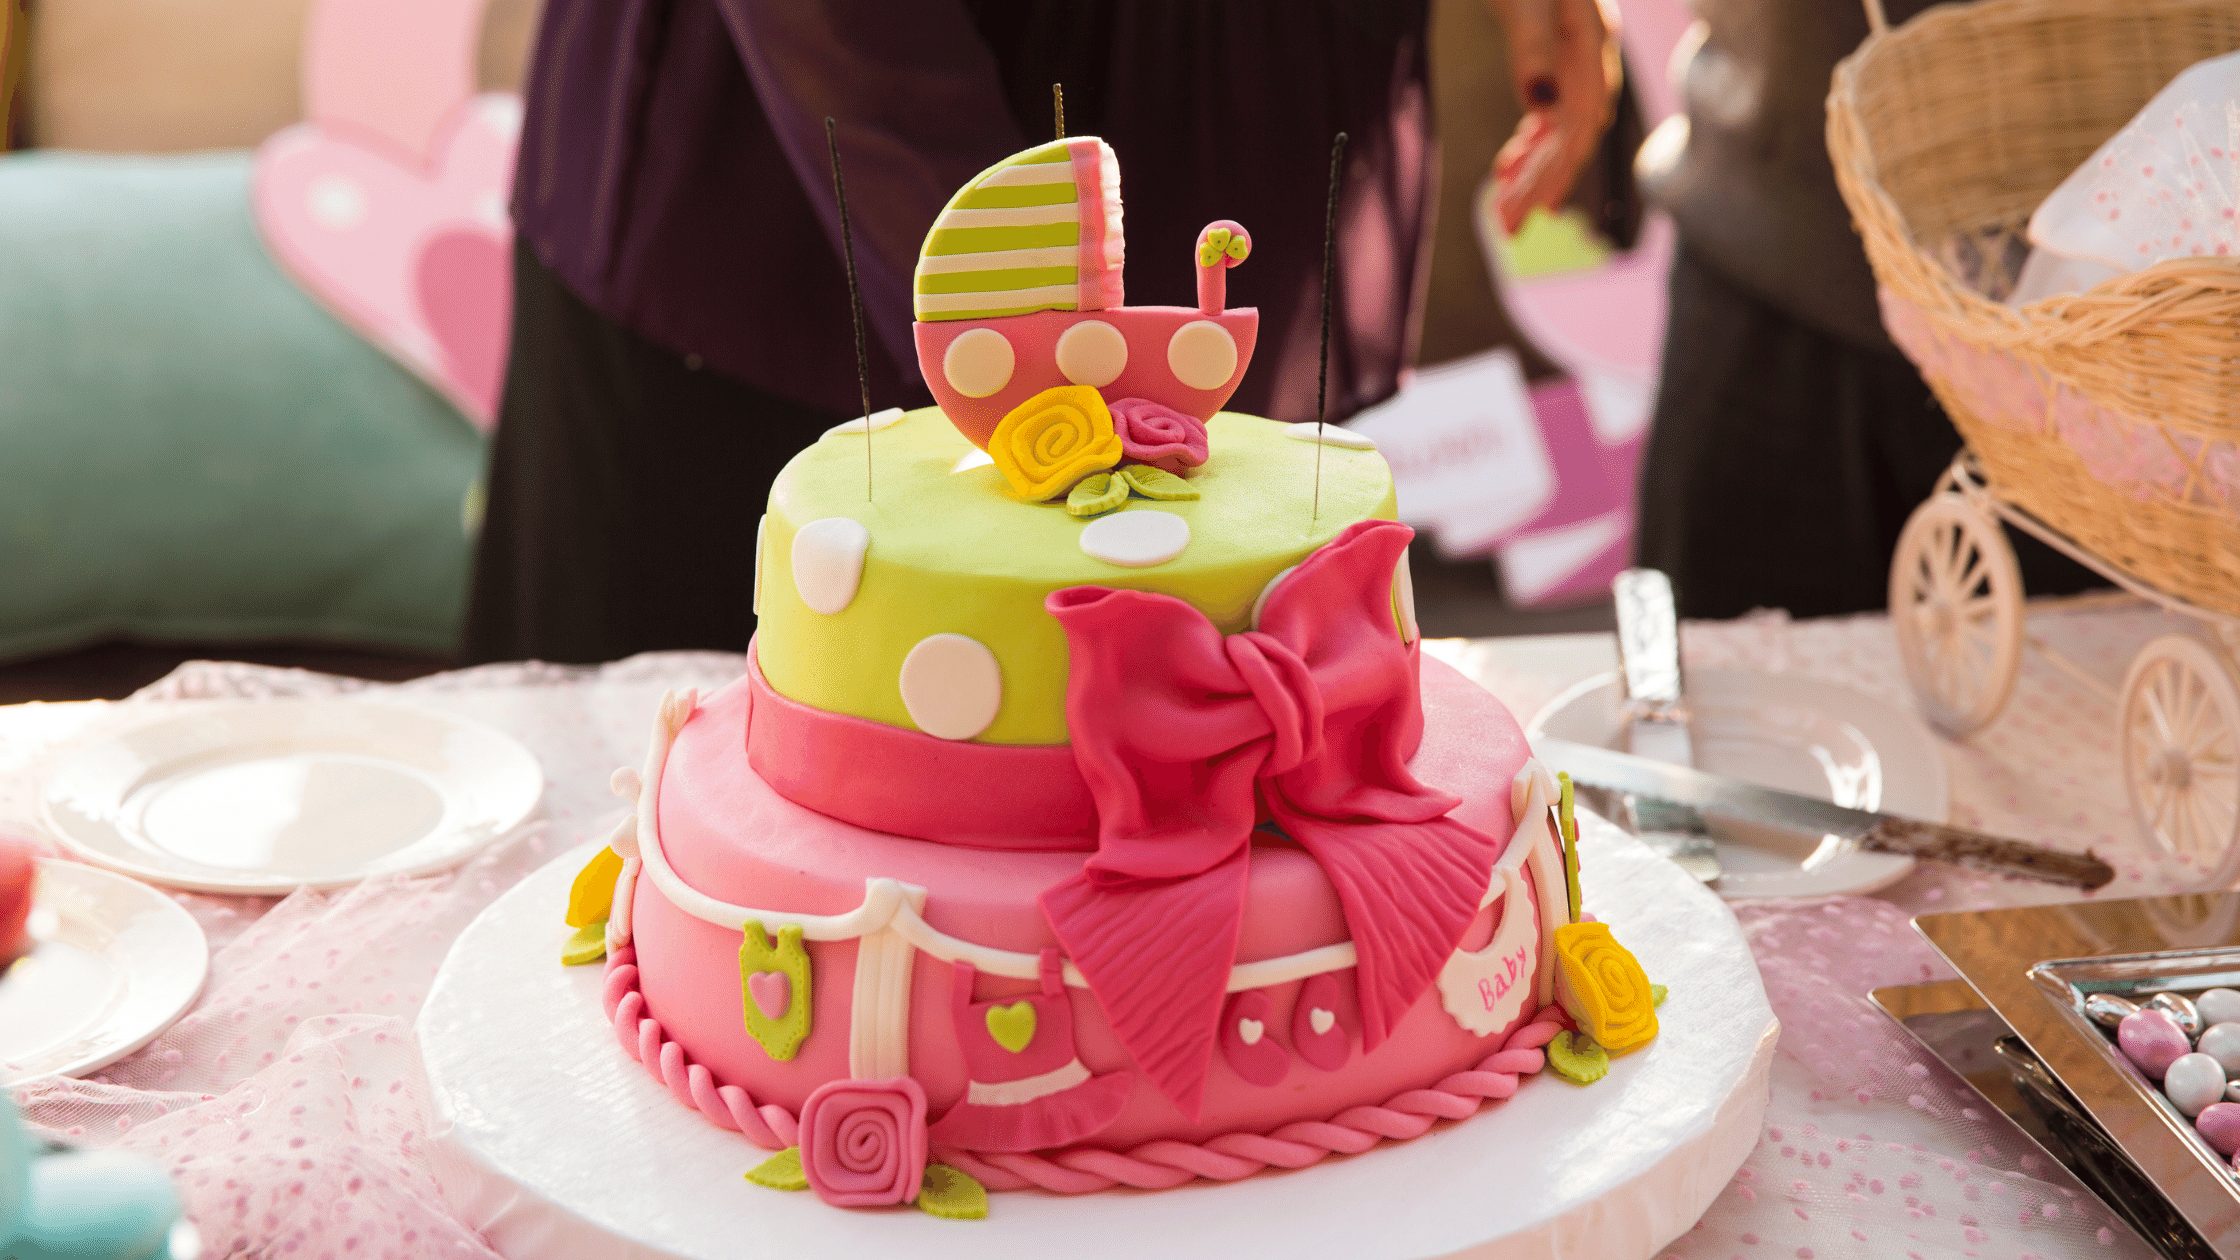 Baby Shower Cake Design Ideas that are way too adorable!